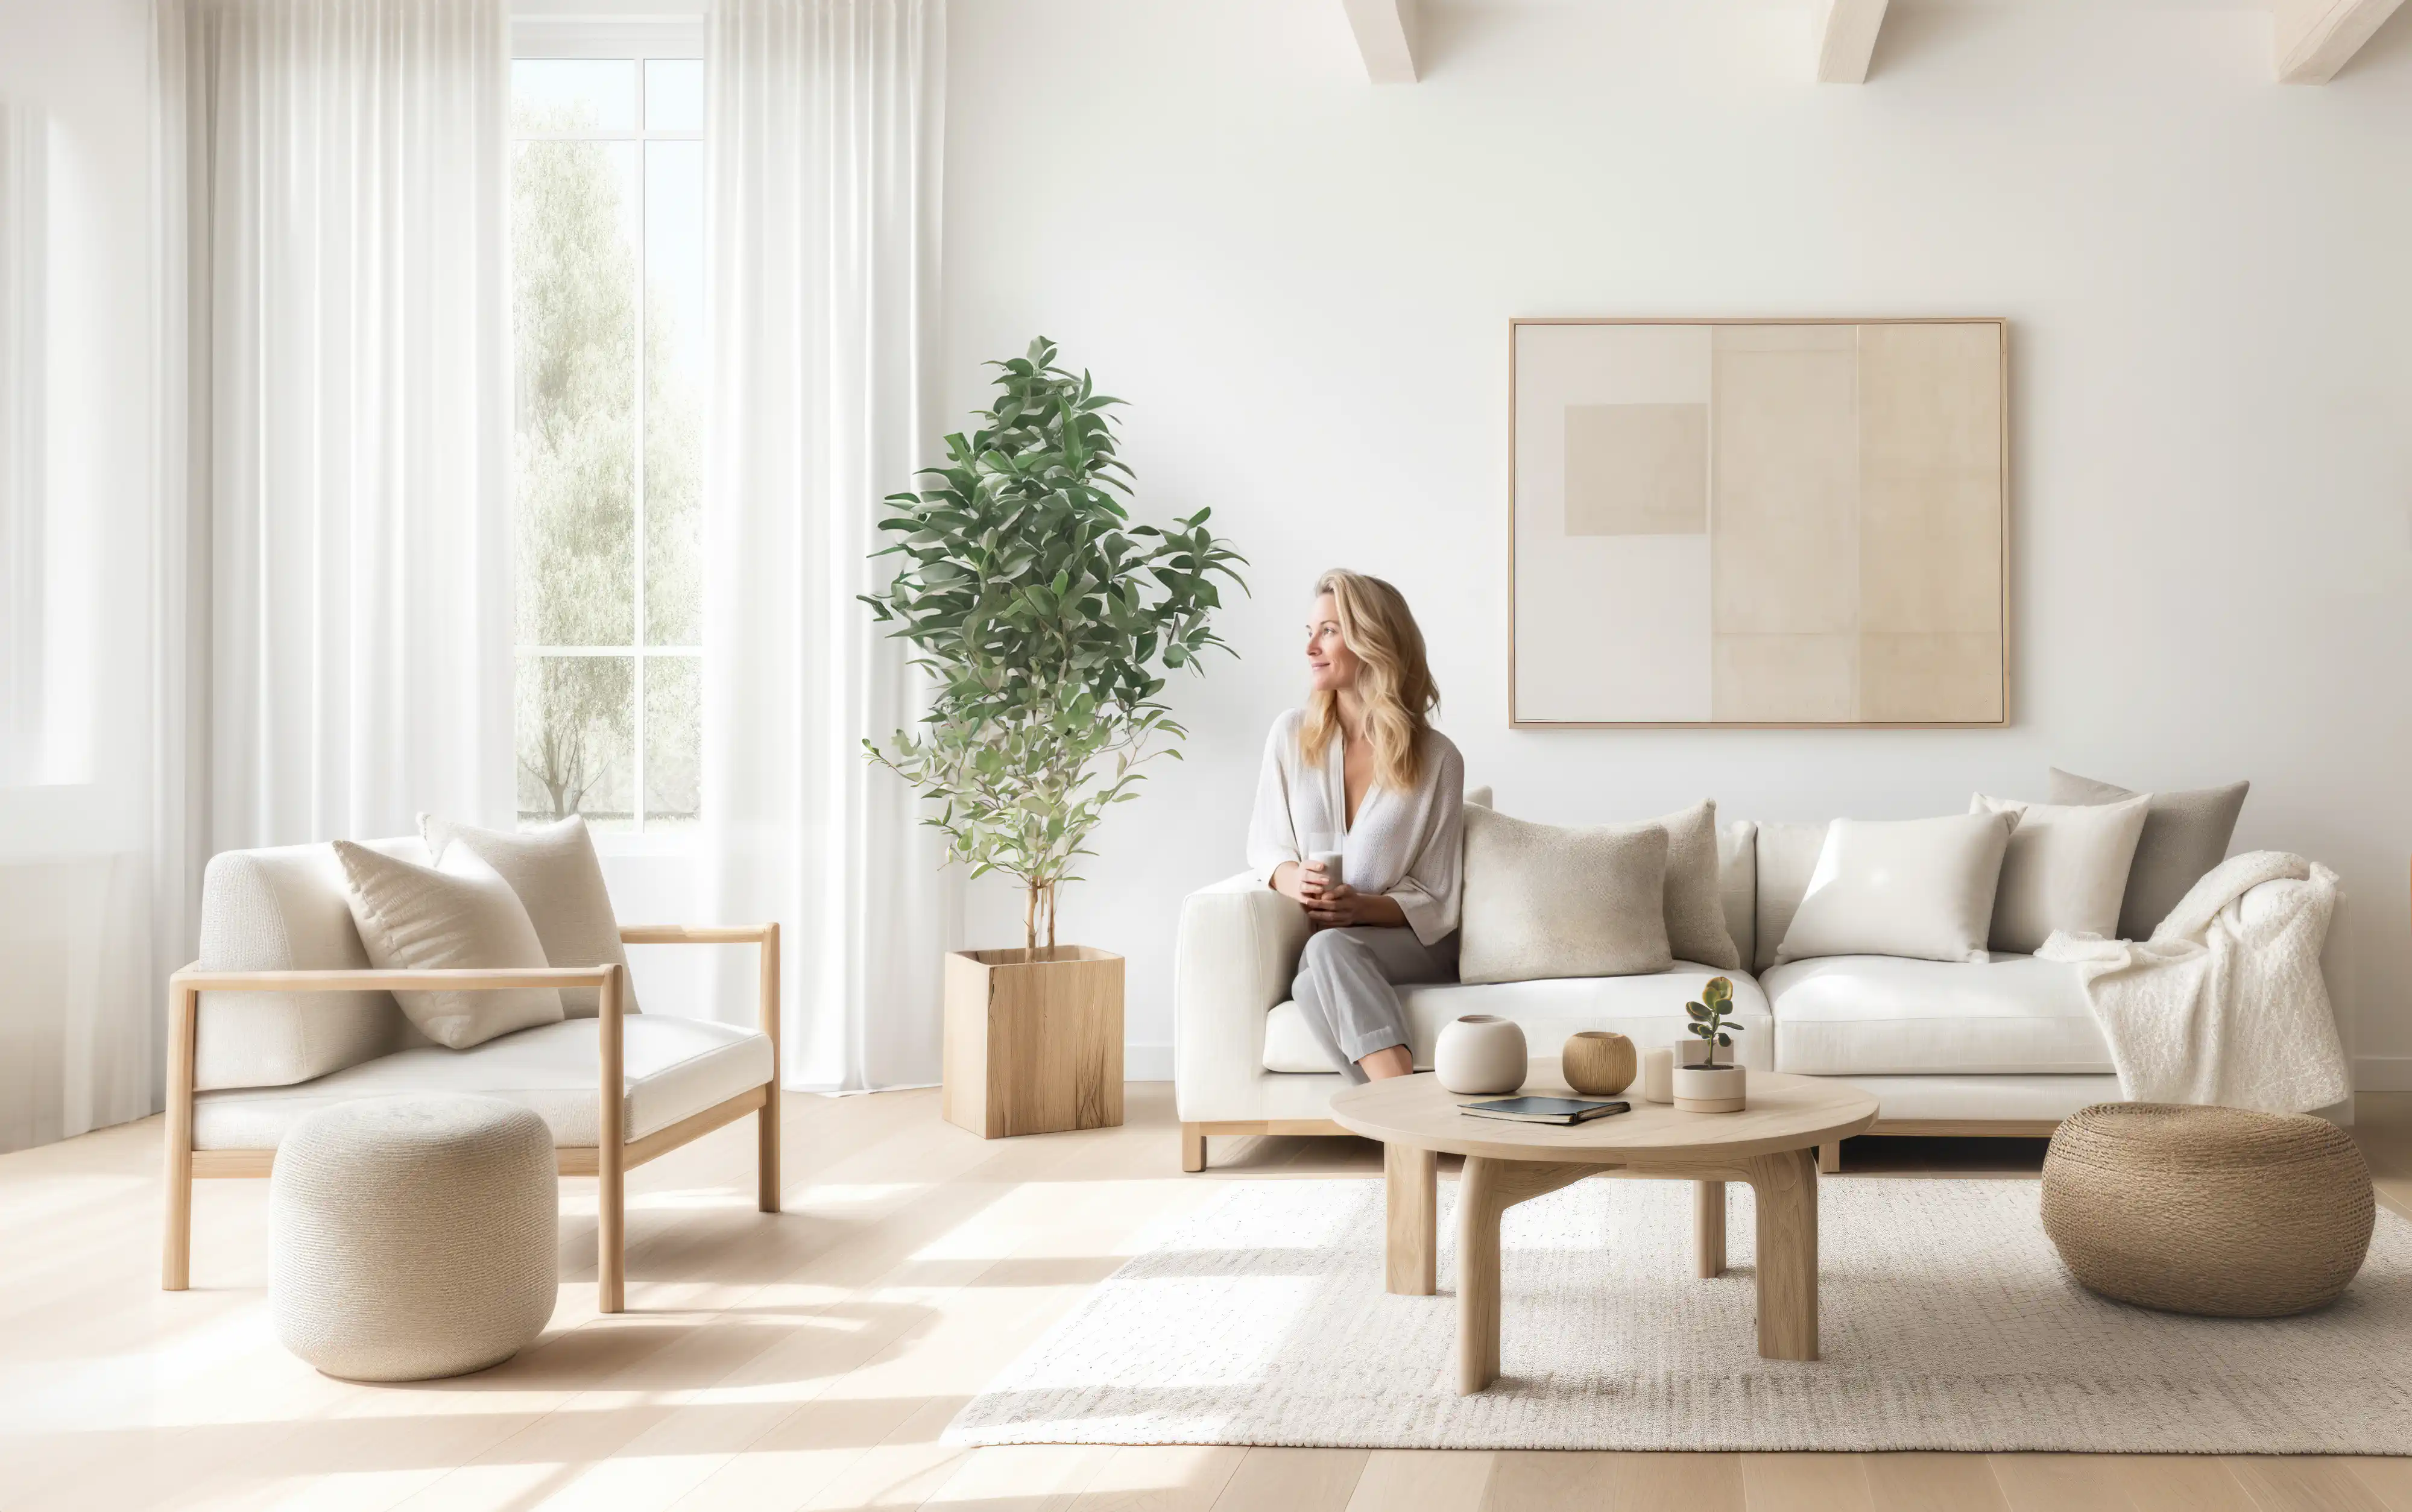 A woman in white sitting on a couch in a modern living room with a window and a plant, interior by Sarah Brown Design